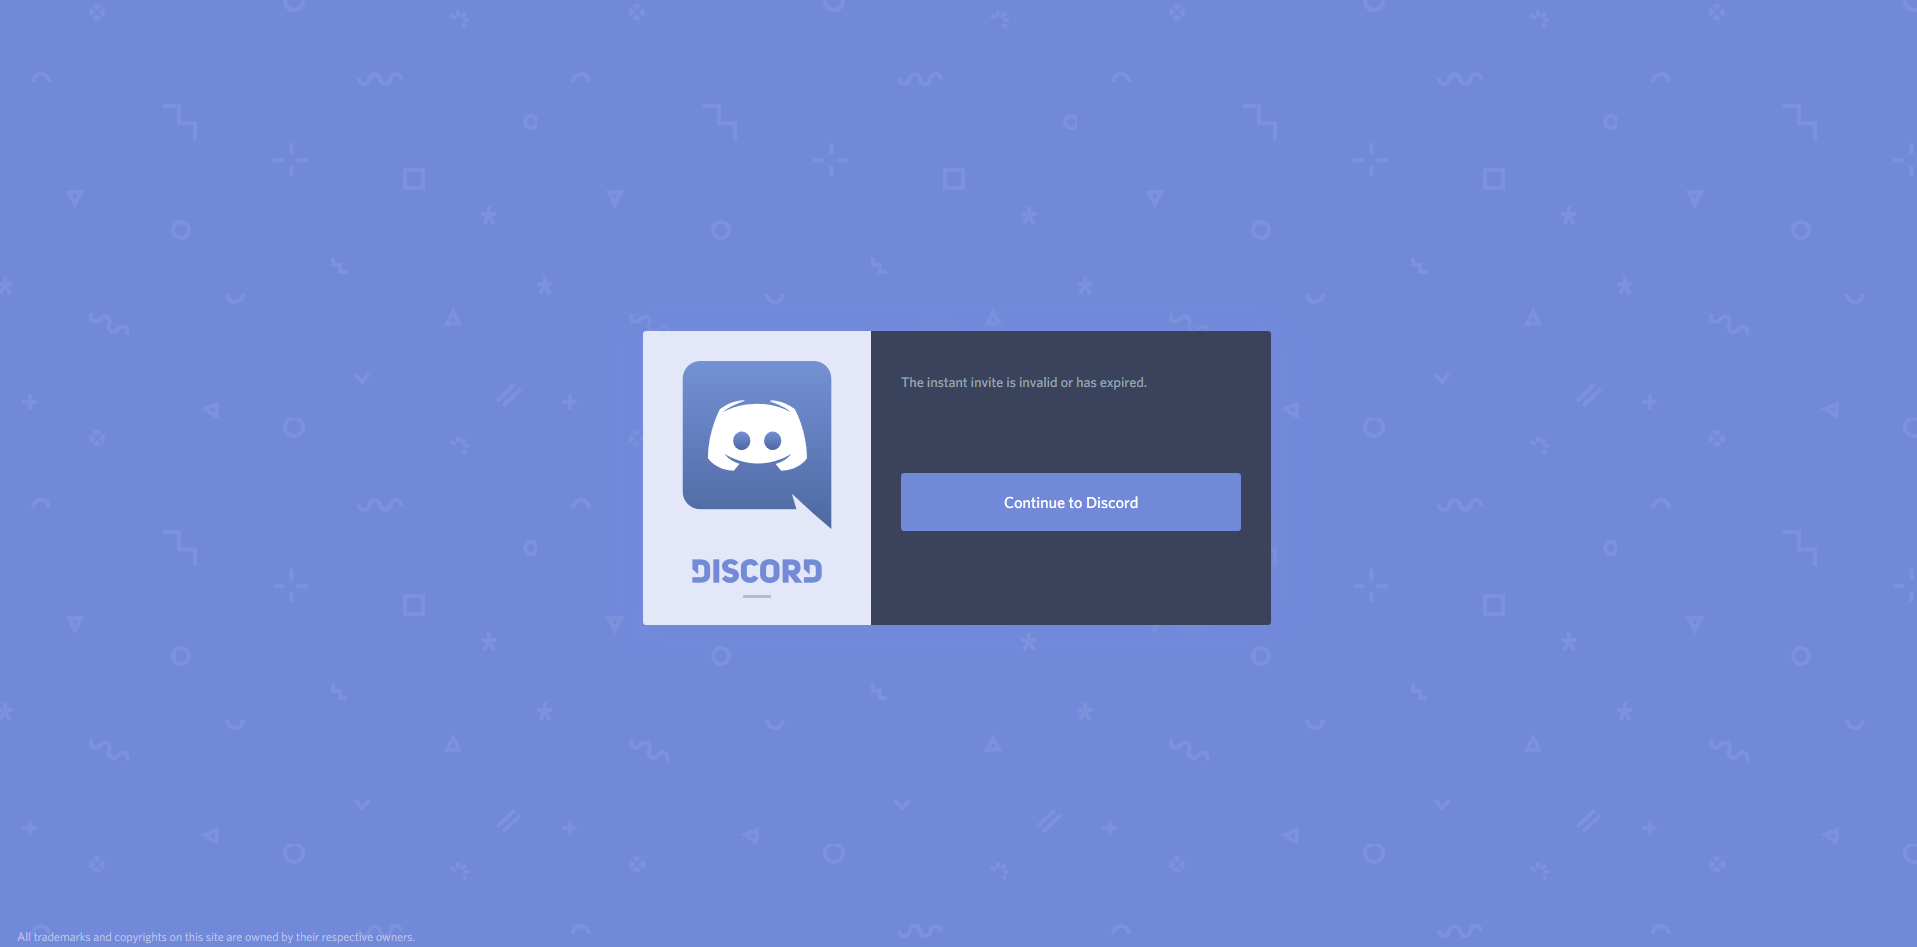 Banned on Discord - Miscellaneous Sites - SDG Forum